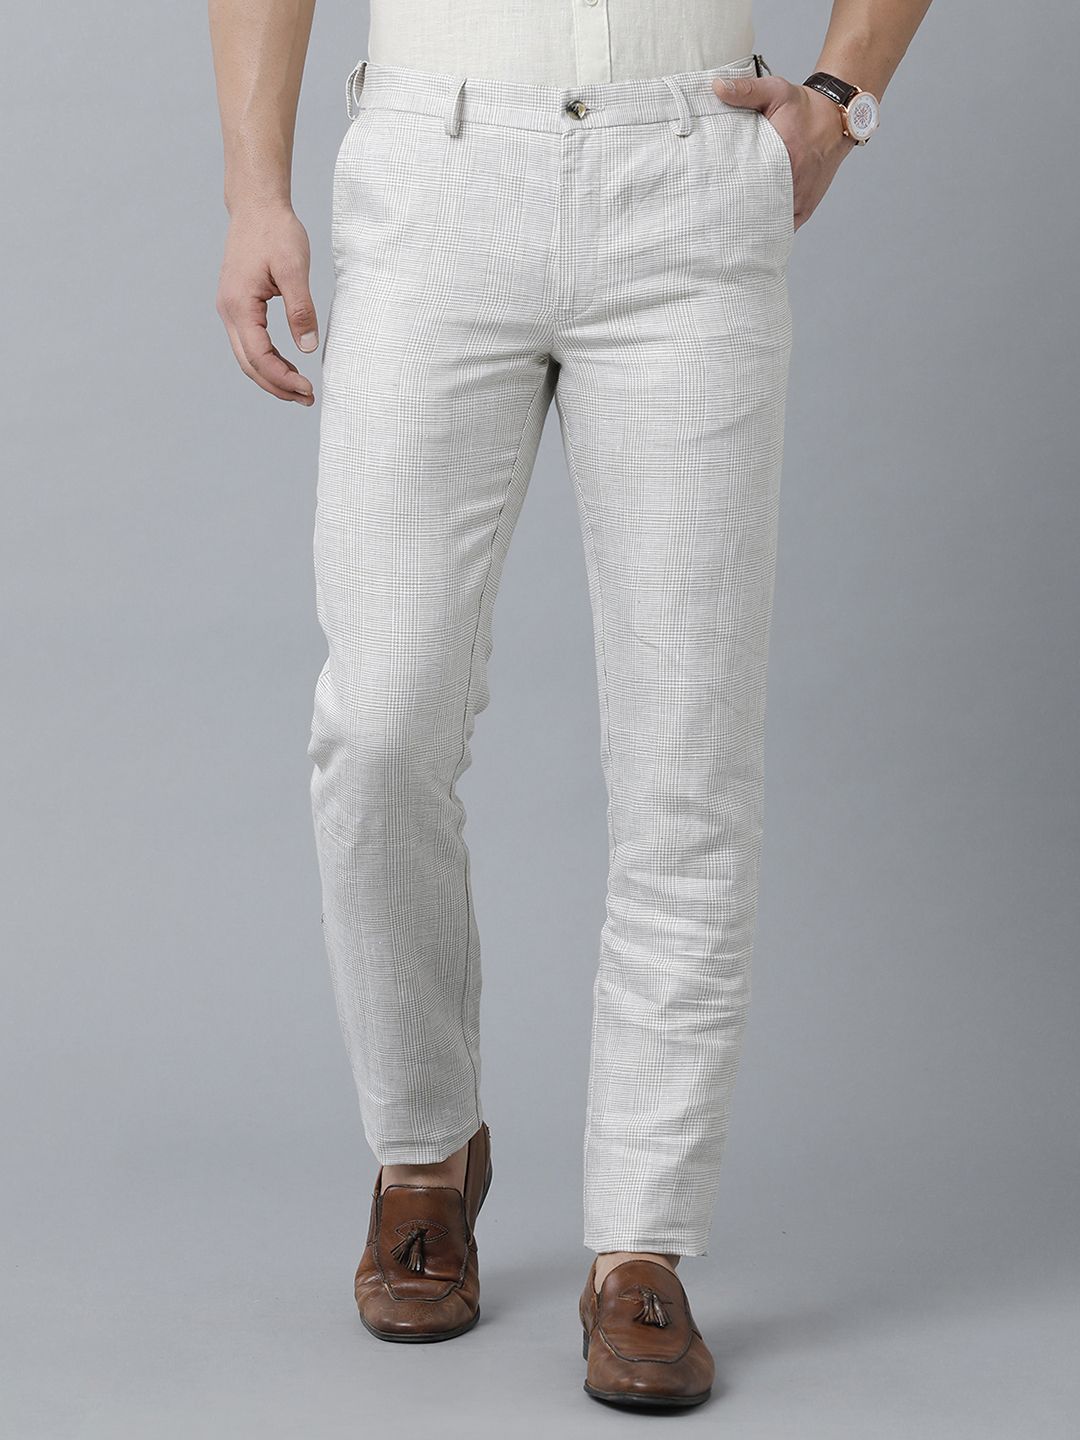 Buy Gap Linen Blend Pleated Trousers from the Gap online shop